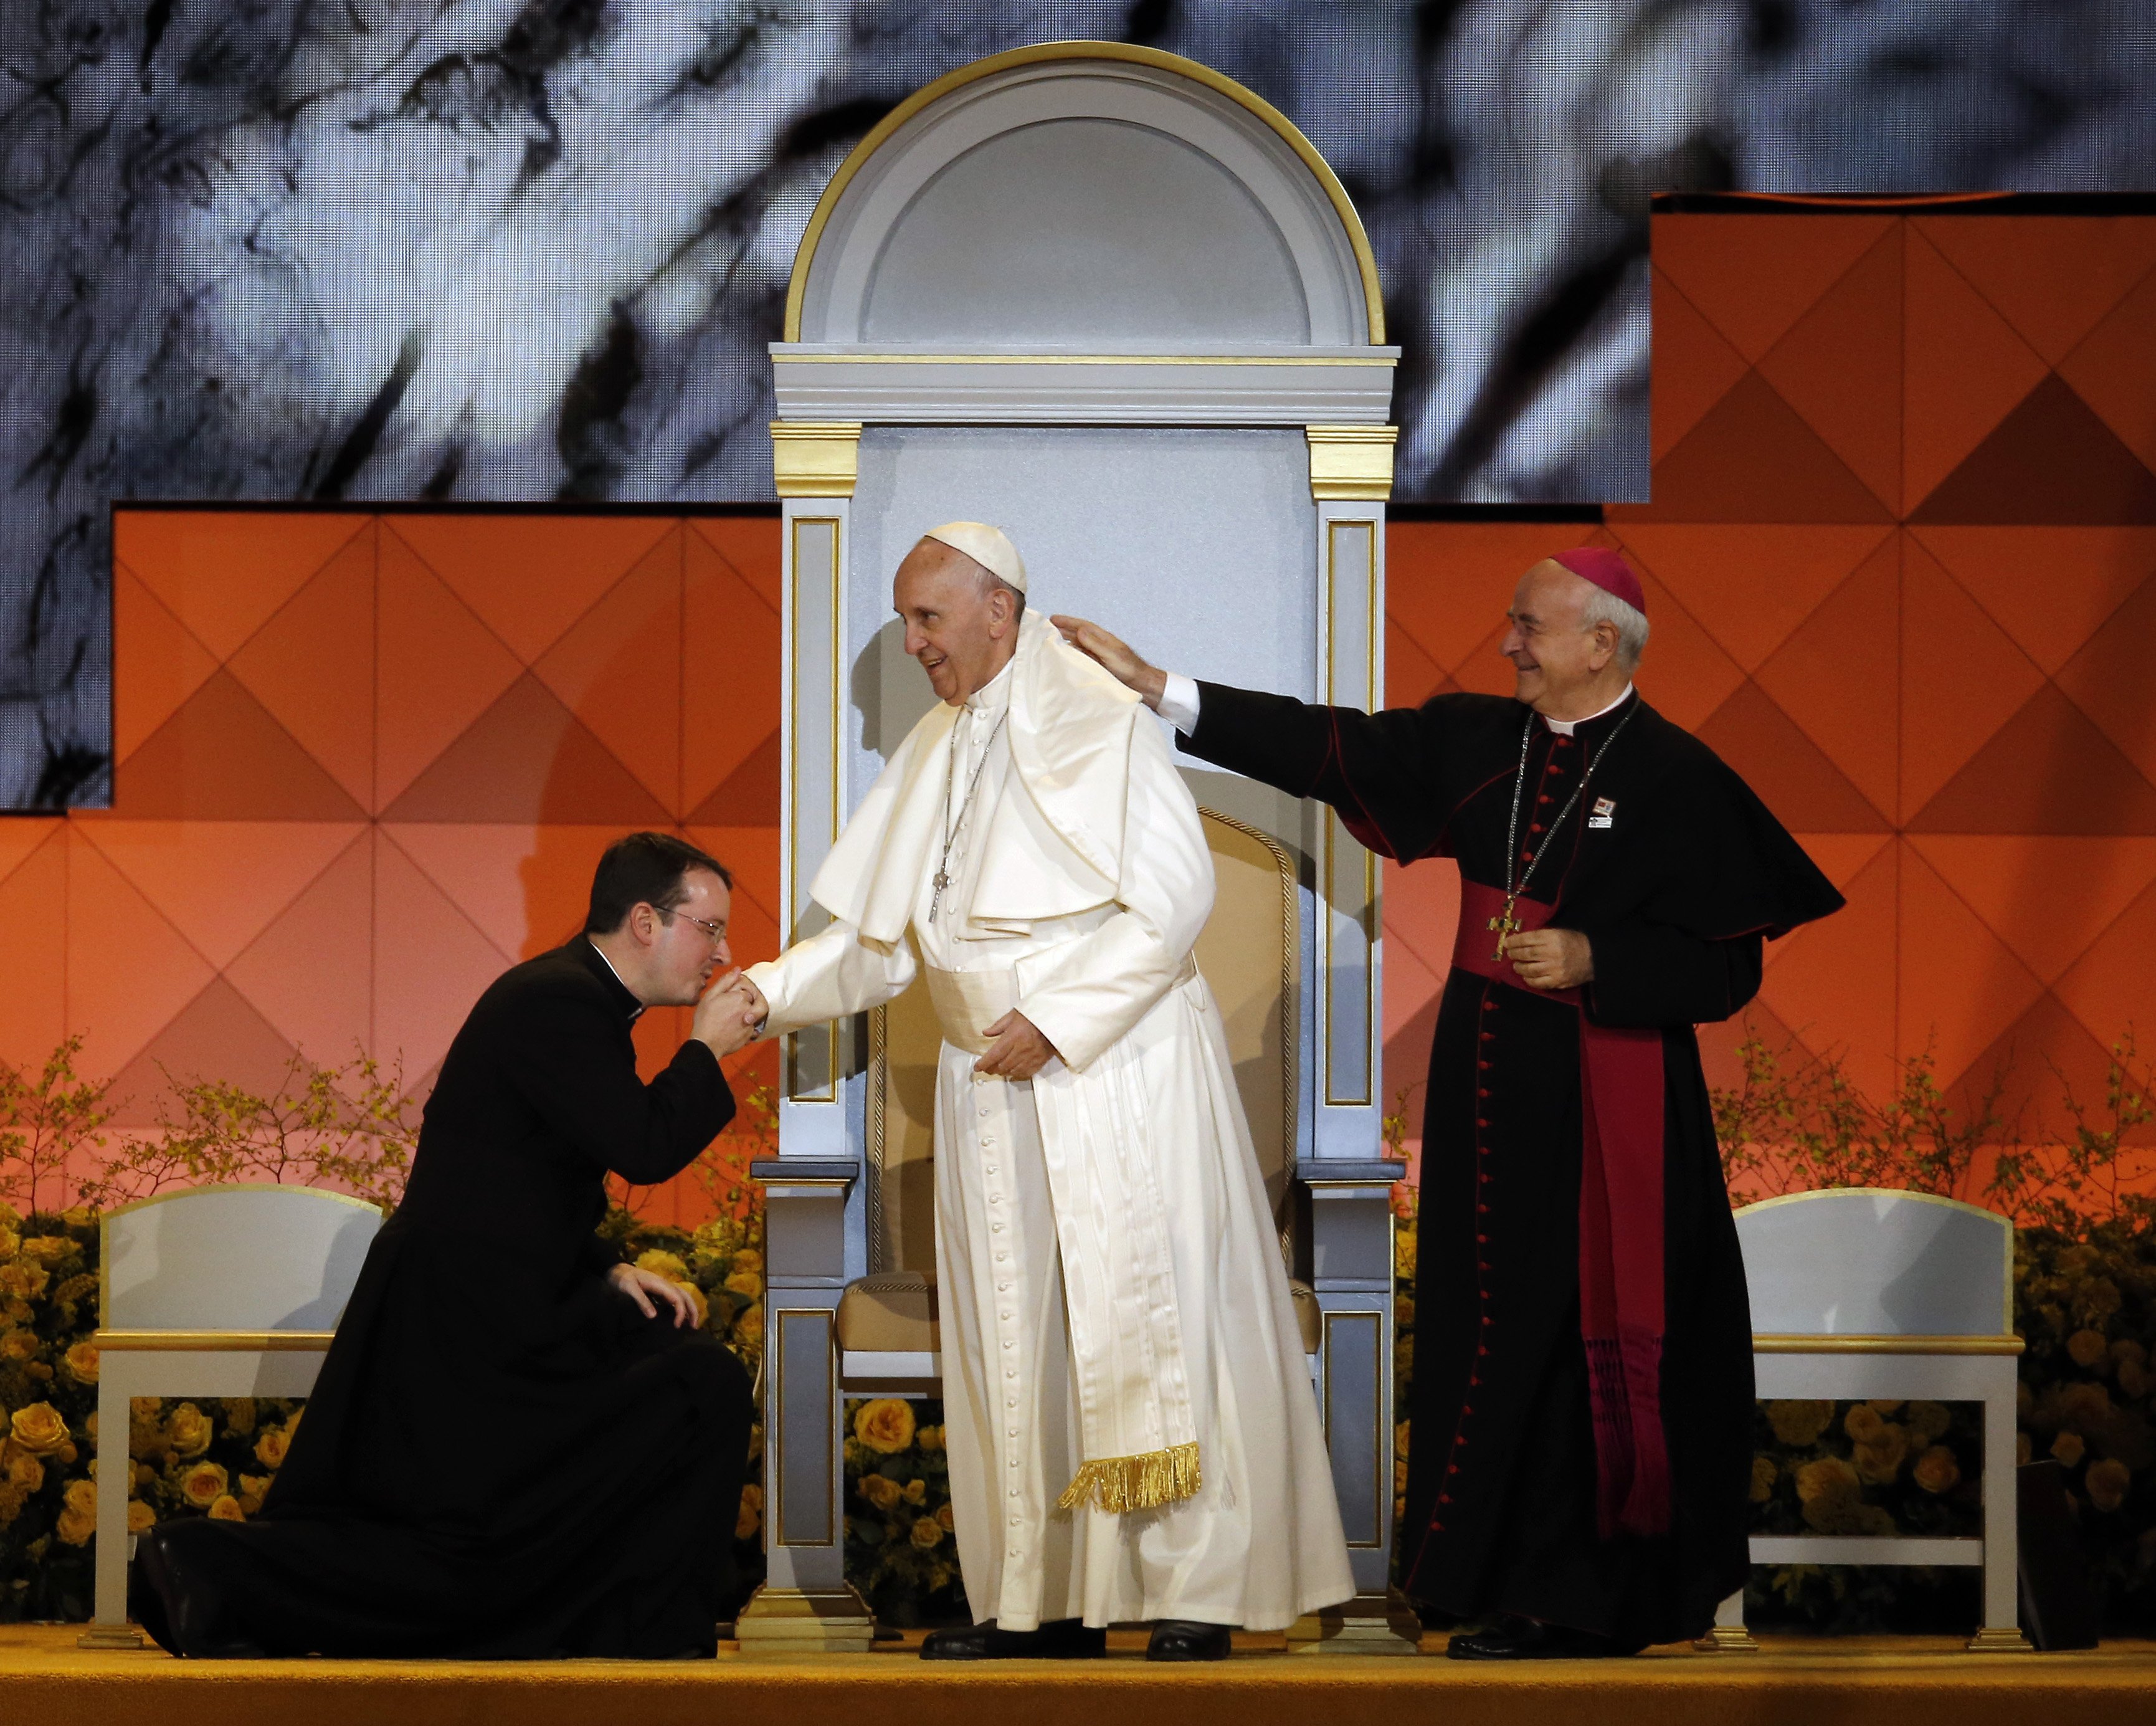 Pope Francis takes the stage during the Festival of Families in Philadelphia, on Sept. 26, 2015.